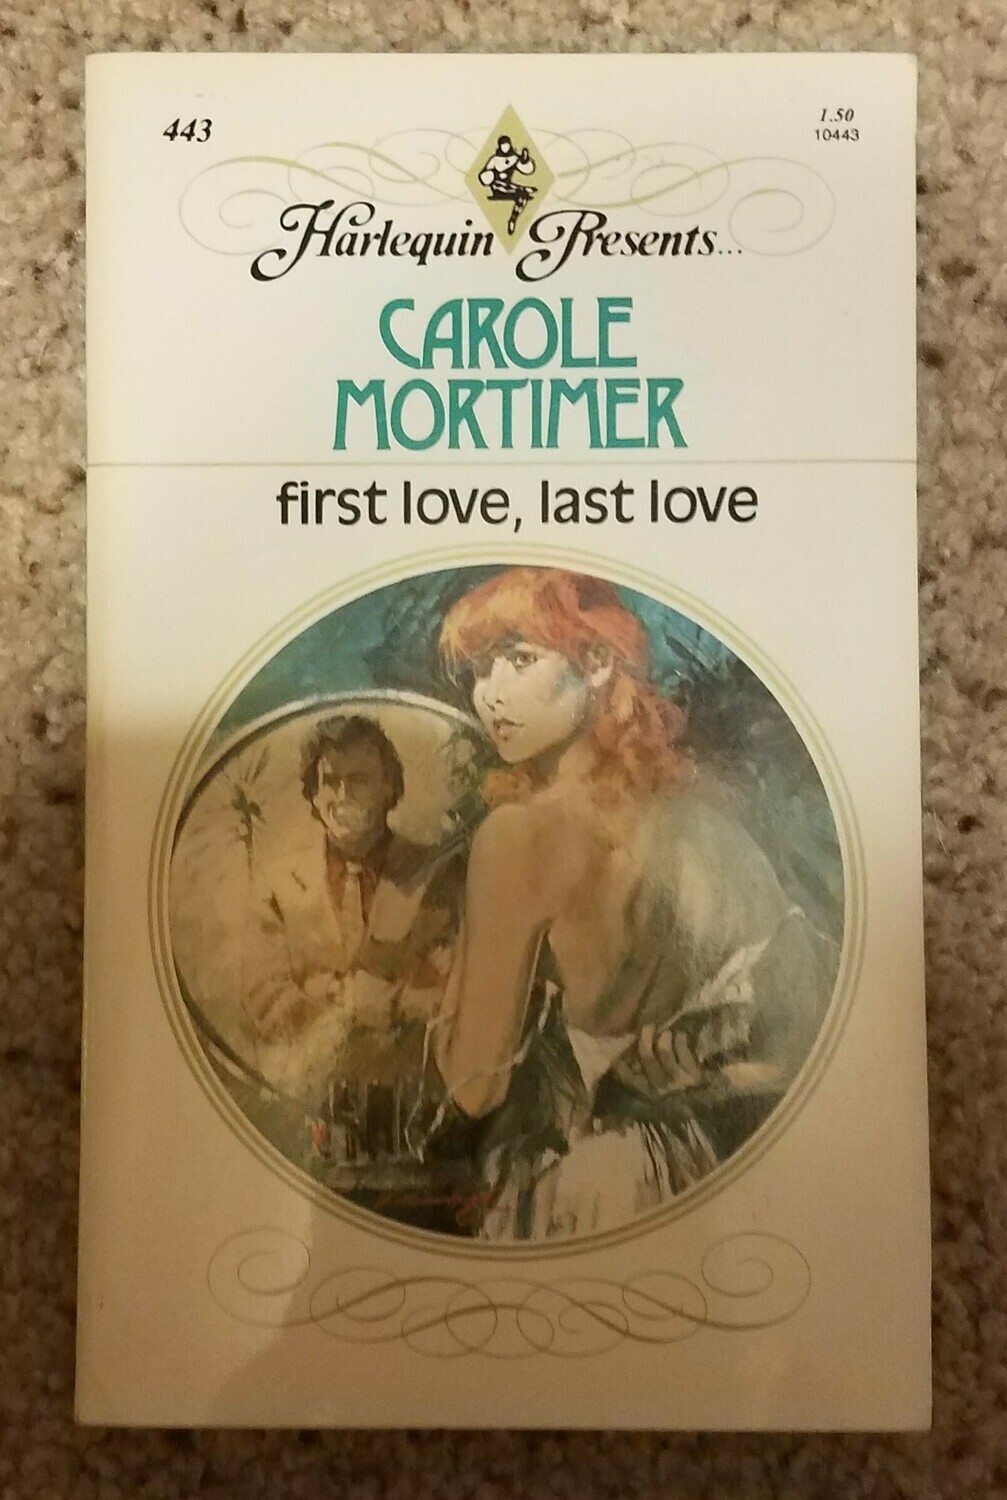 First Love, Last Love by Carole Mortimer